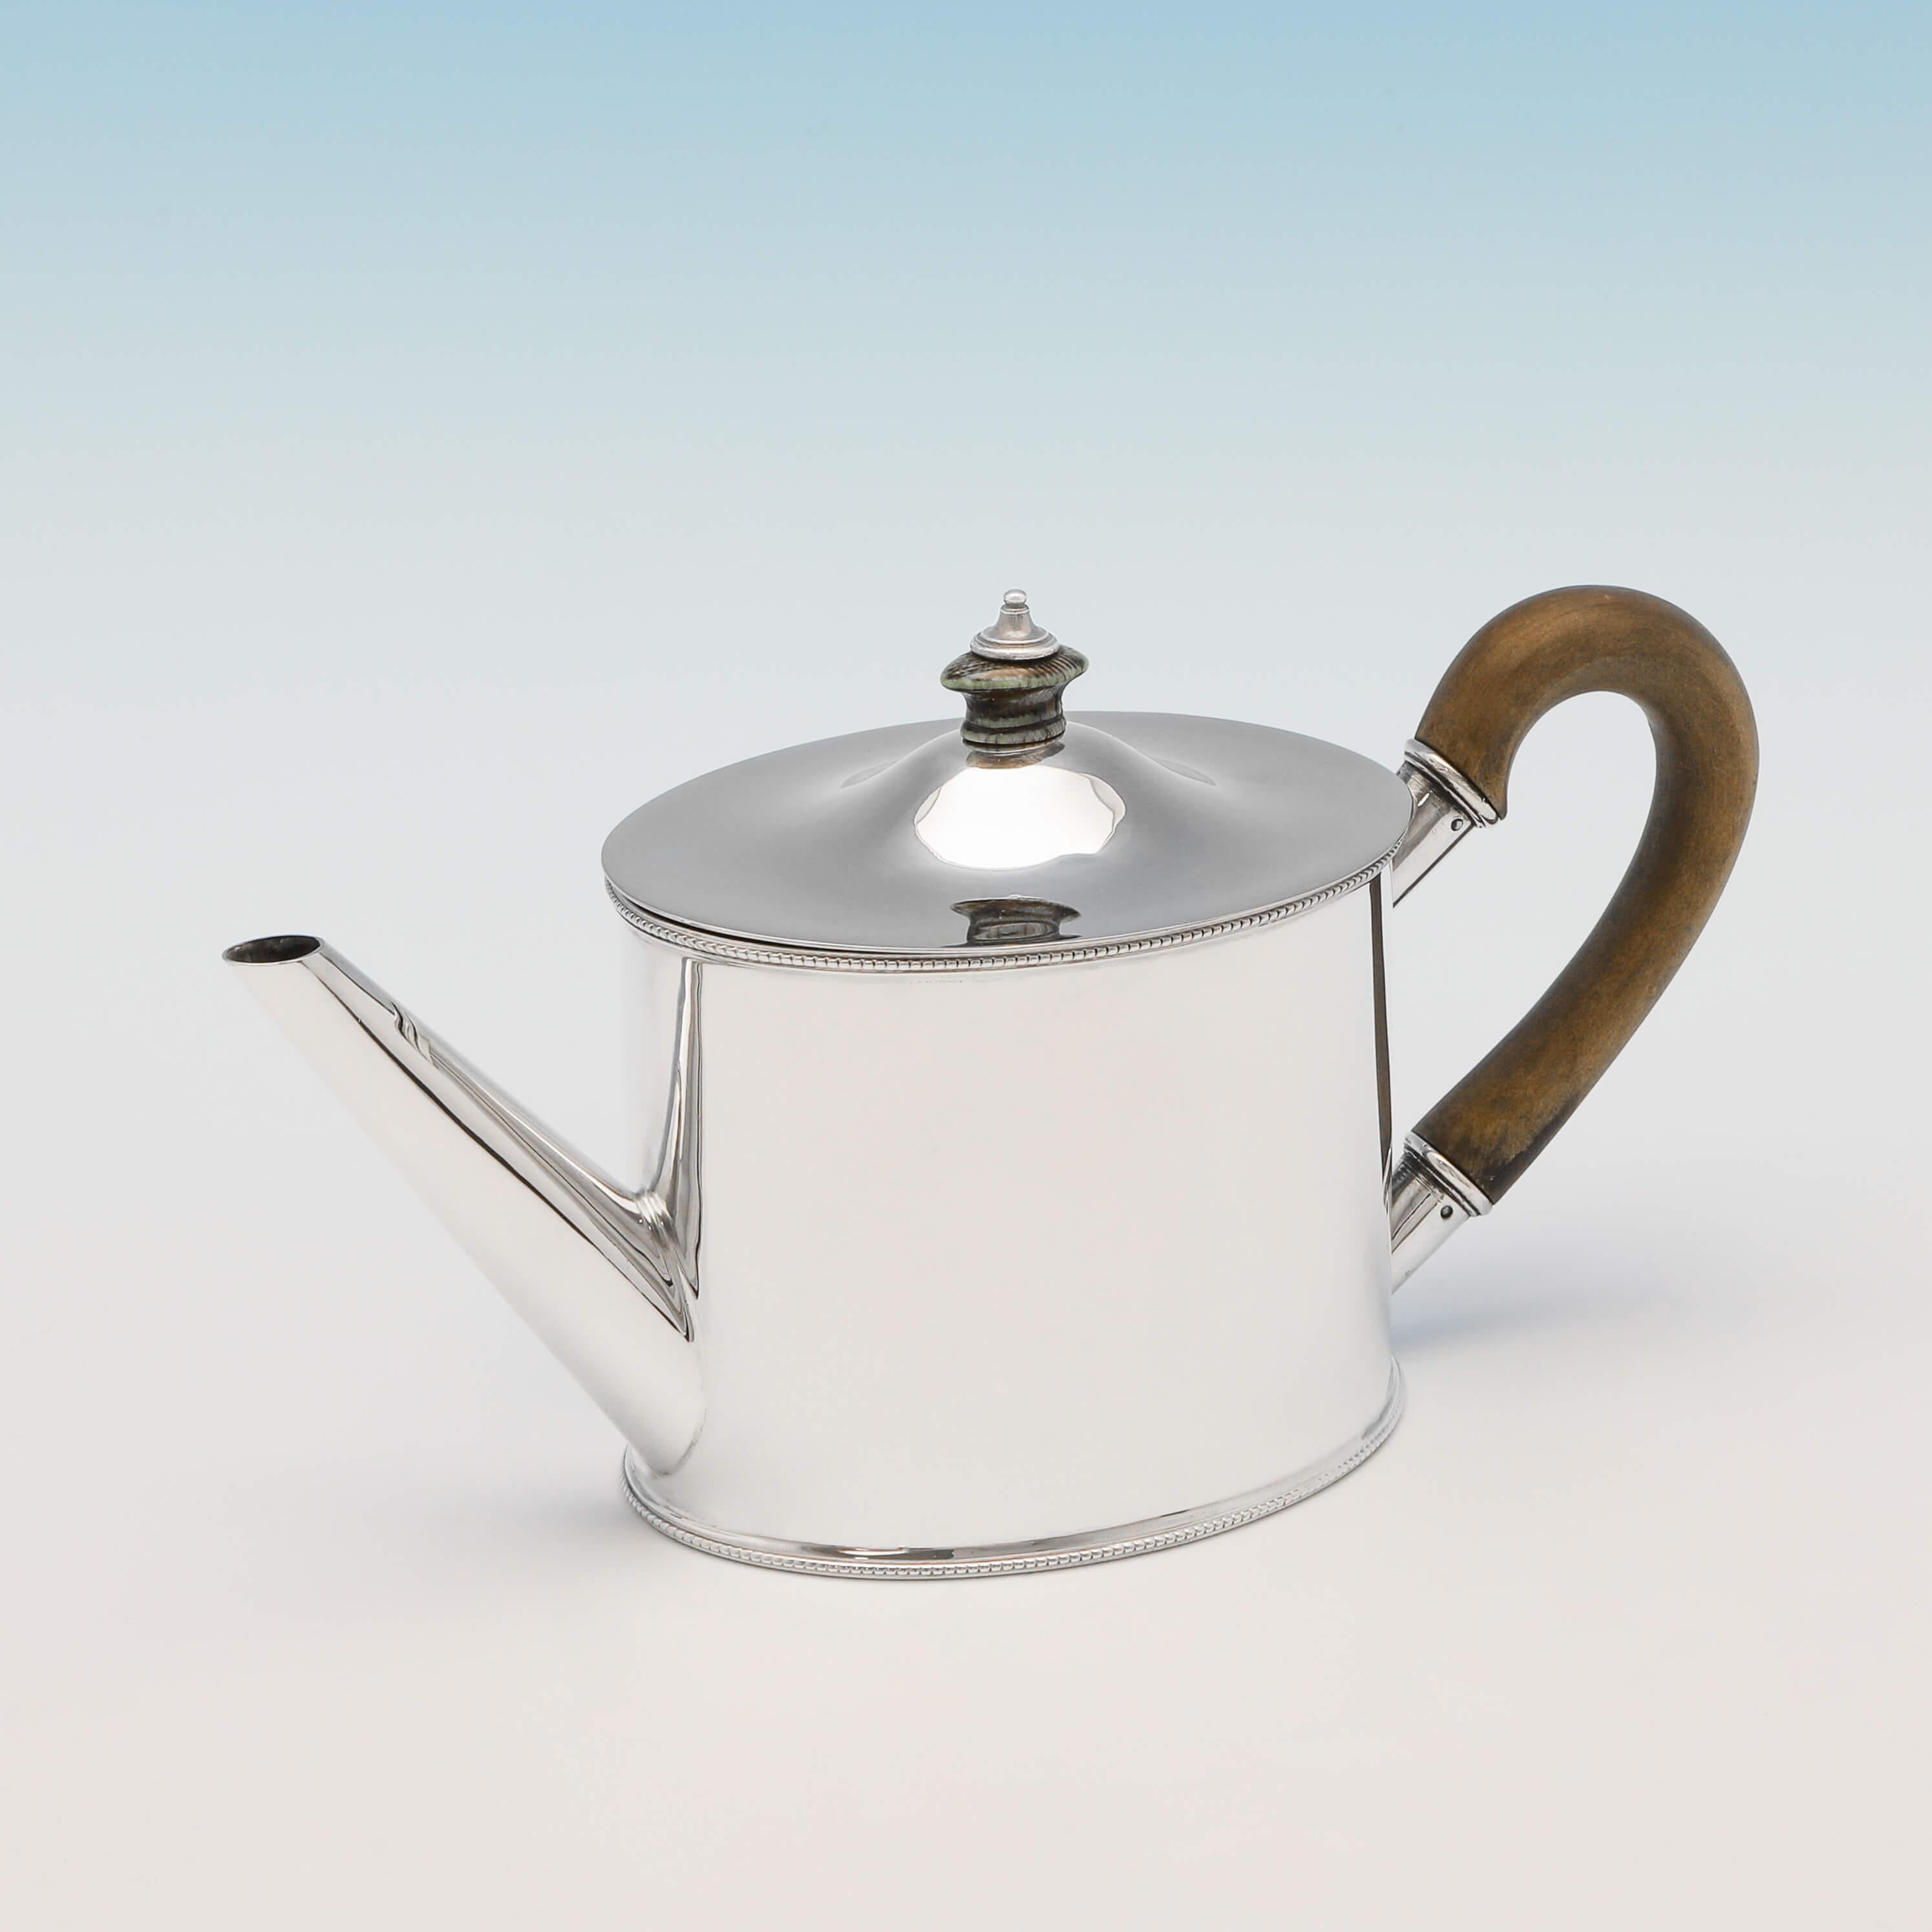 Hallmarked in Sheffield in 1924 by Roberts & Belk, this handsome, sterling silver teapot, is plain in style, with bead borders, a wooden handle, and a removable lid. The teapot measures 8.5